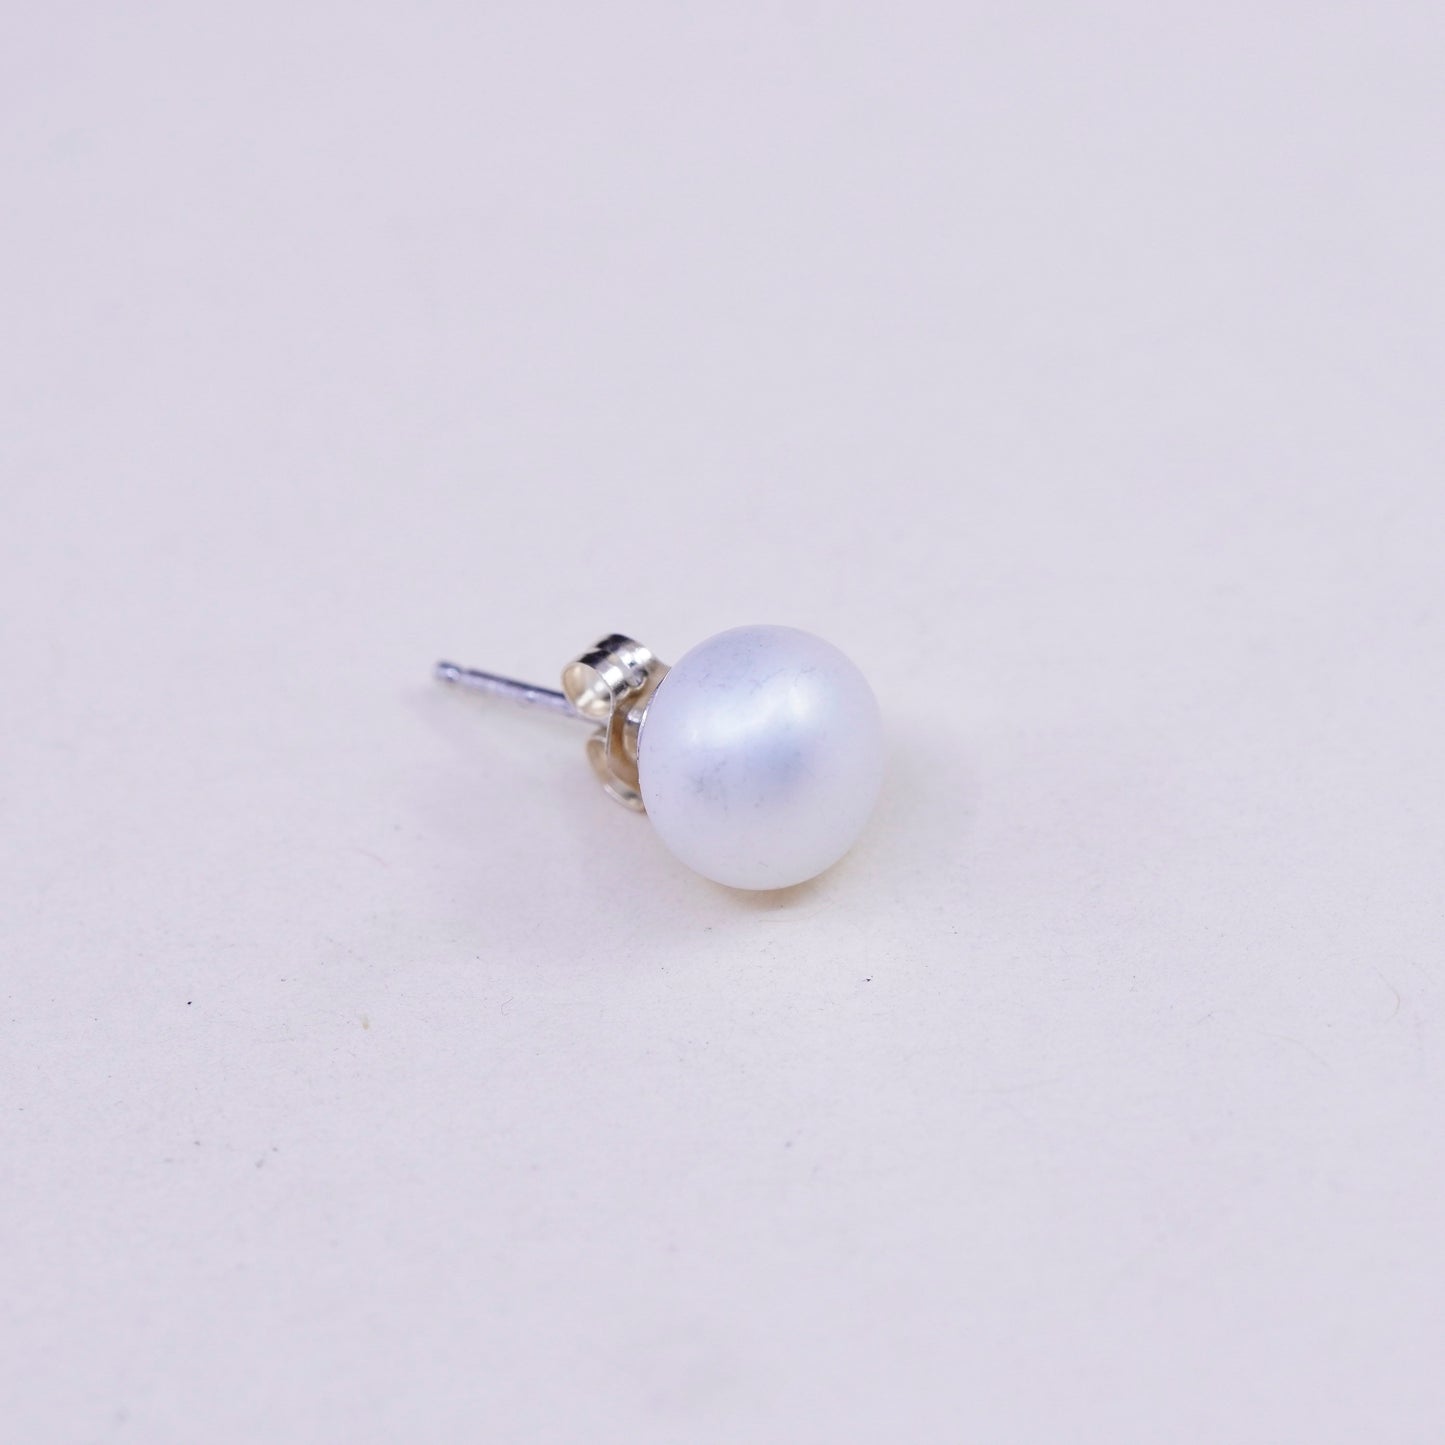 Vintage sterling silver earrings, 925 studs with pearl